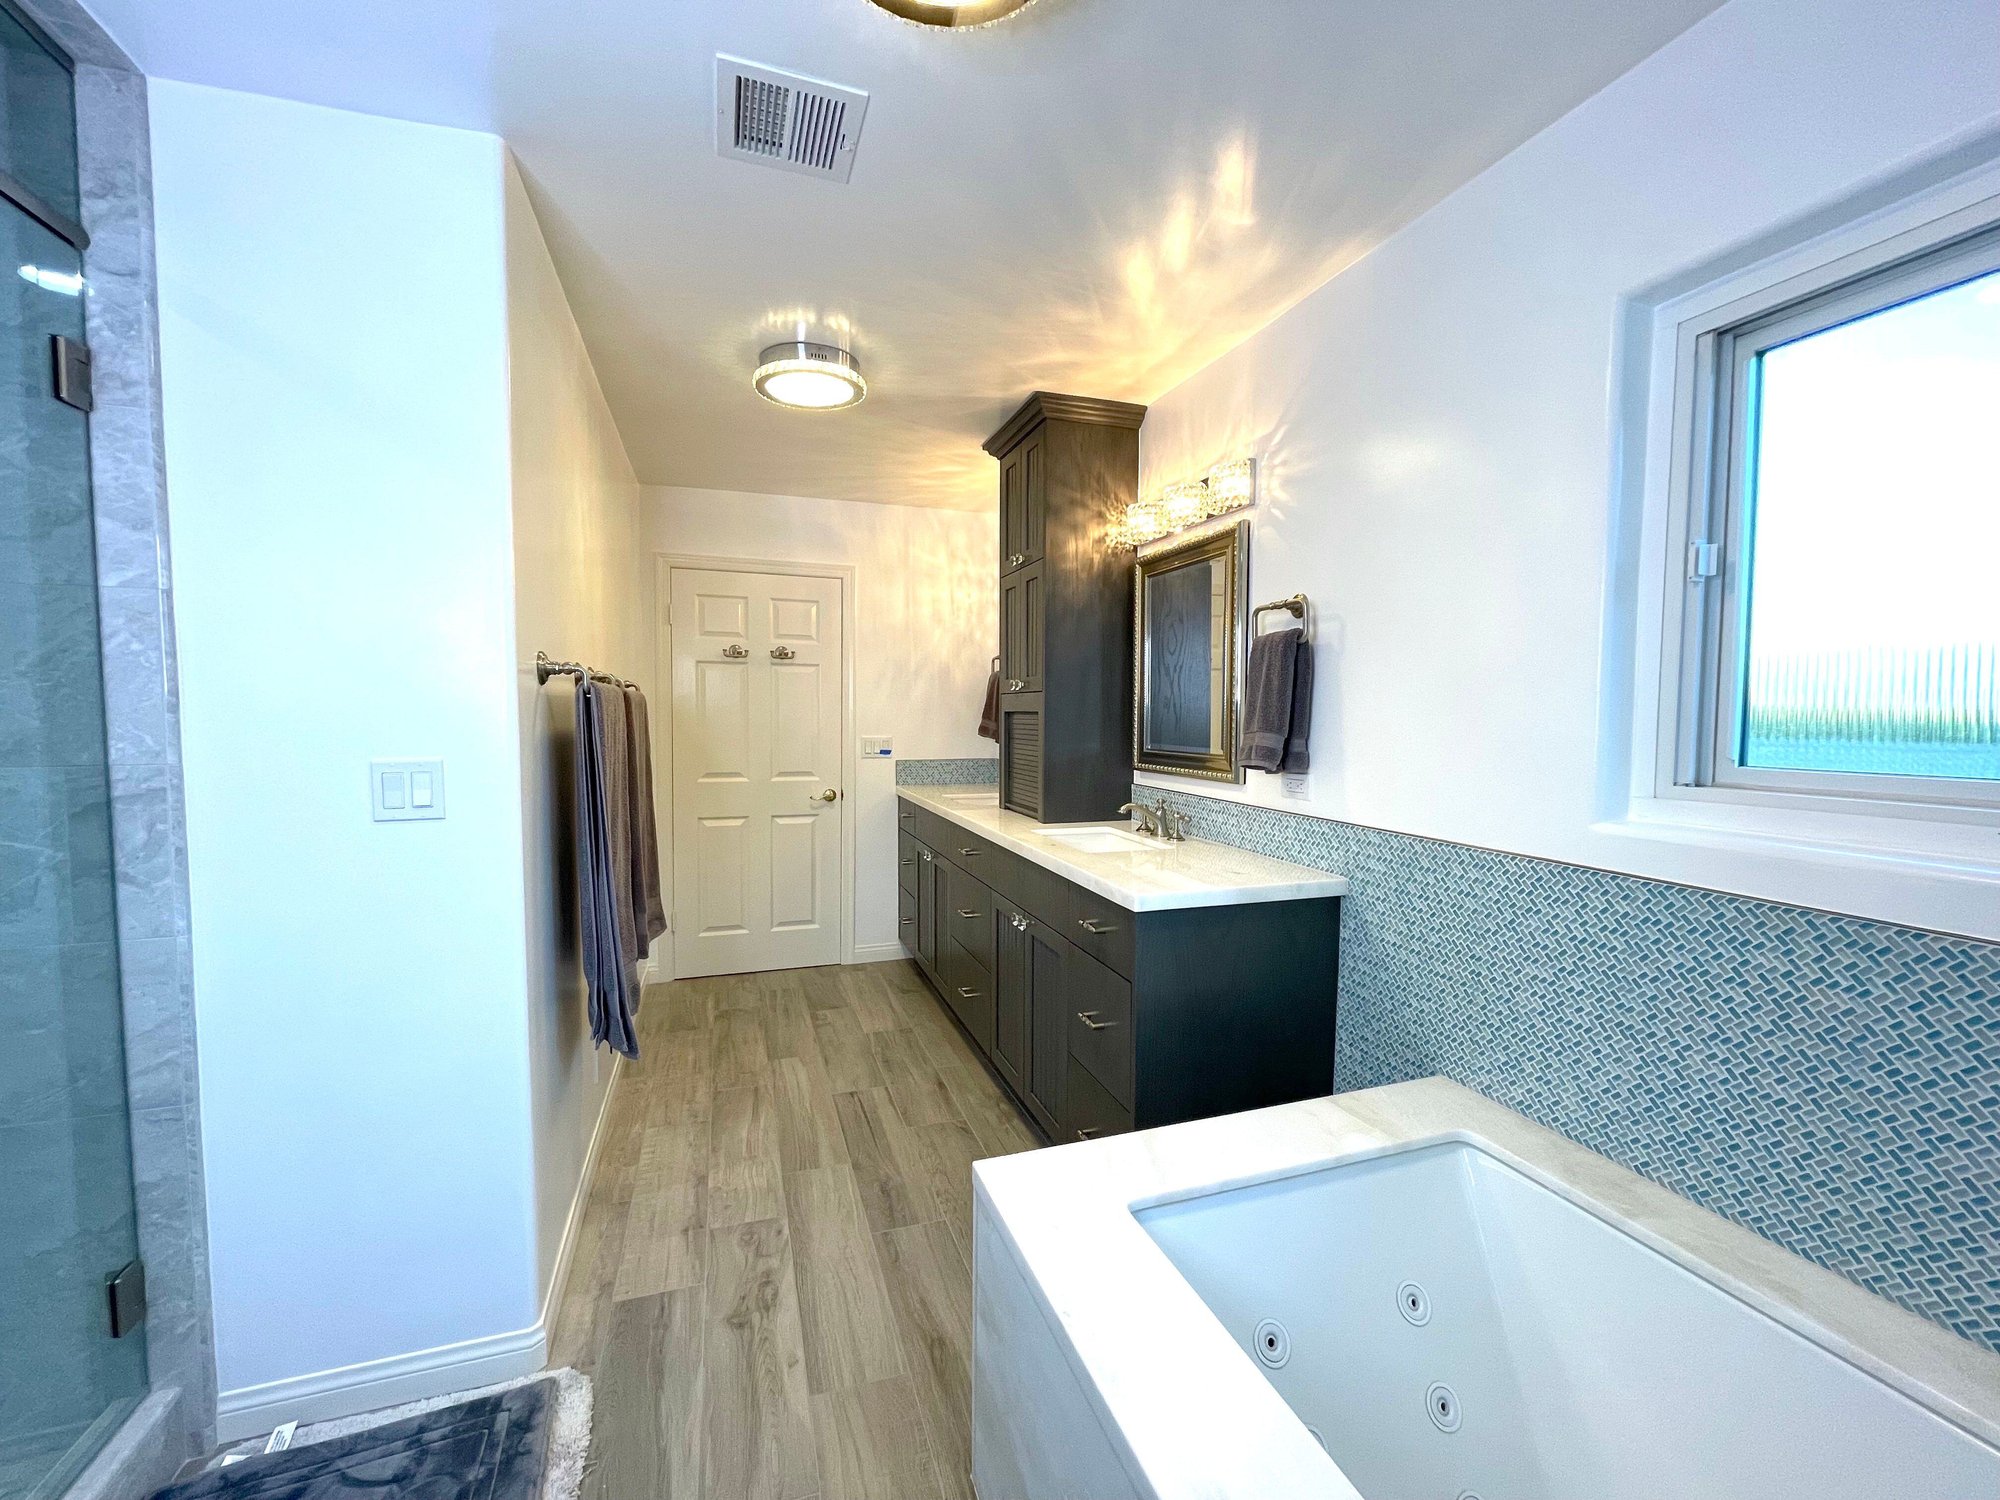 whirlpool tub - Master bathroom remodel - best south bay - bay cities construction